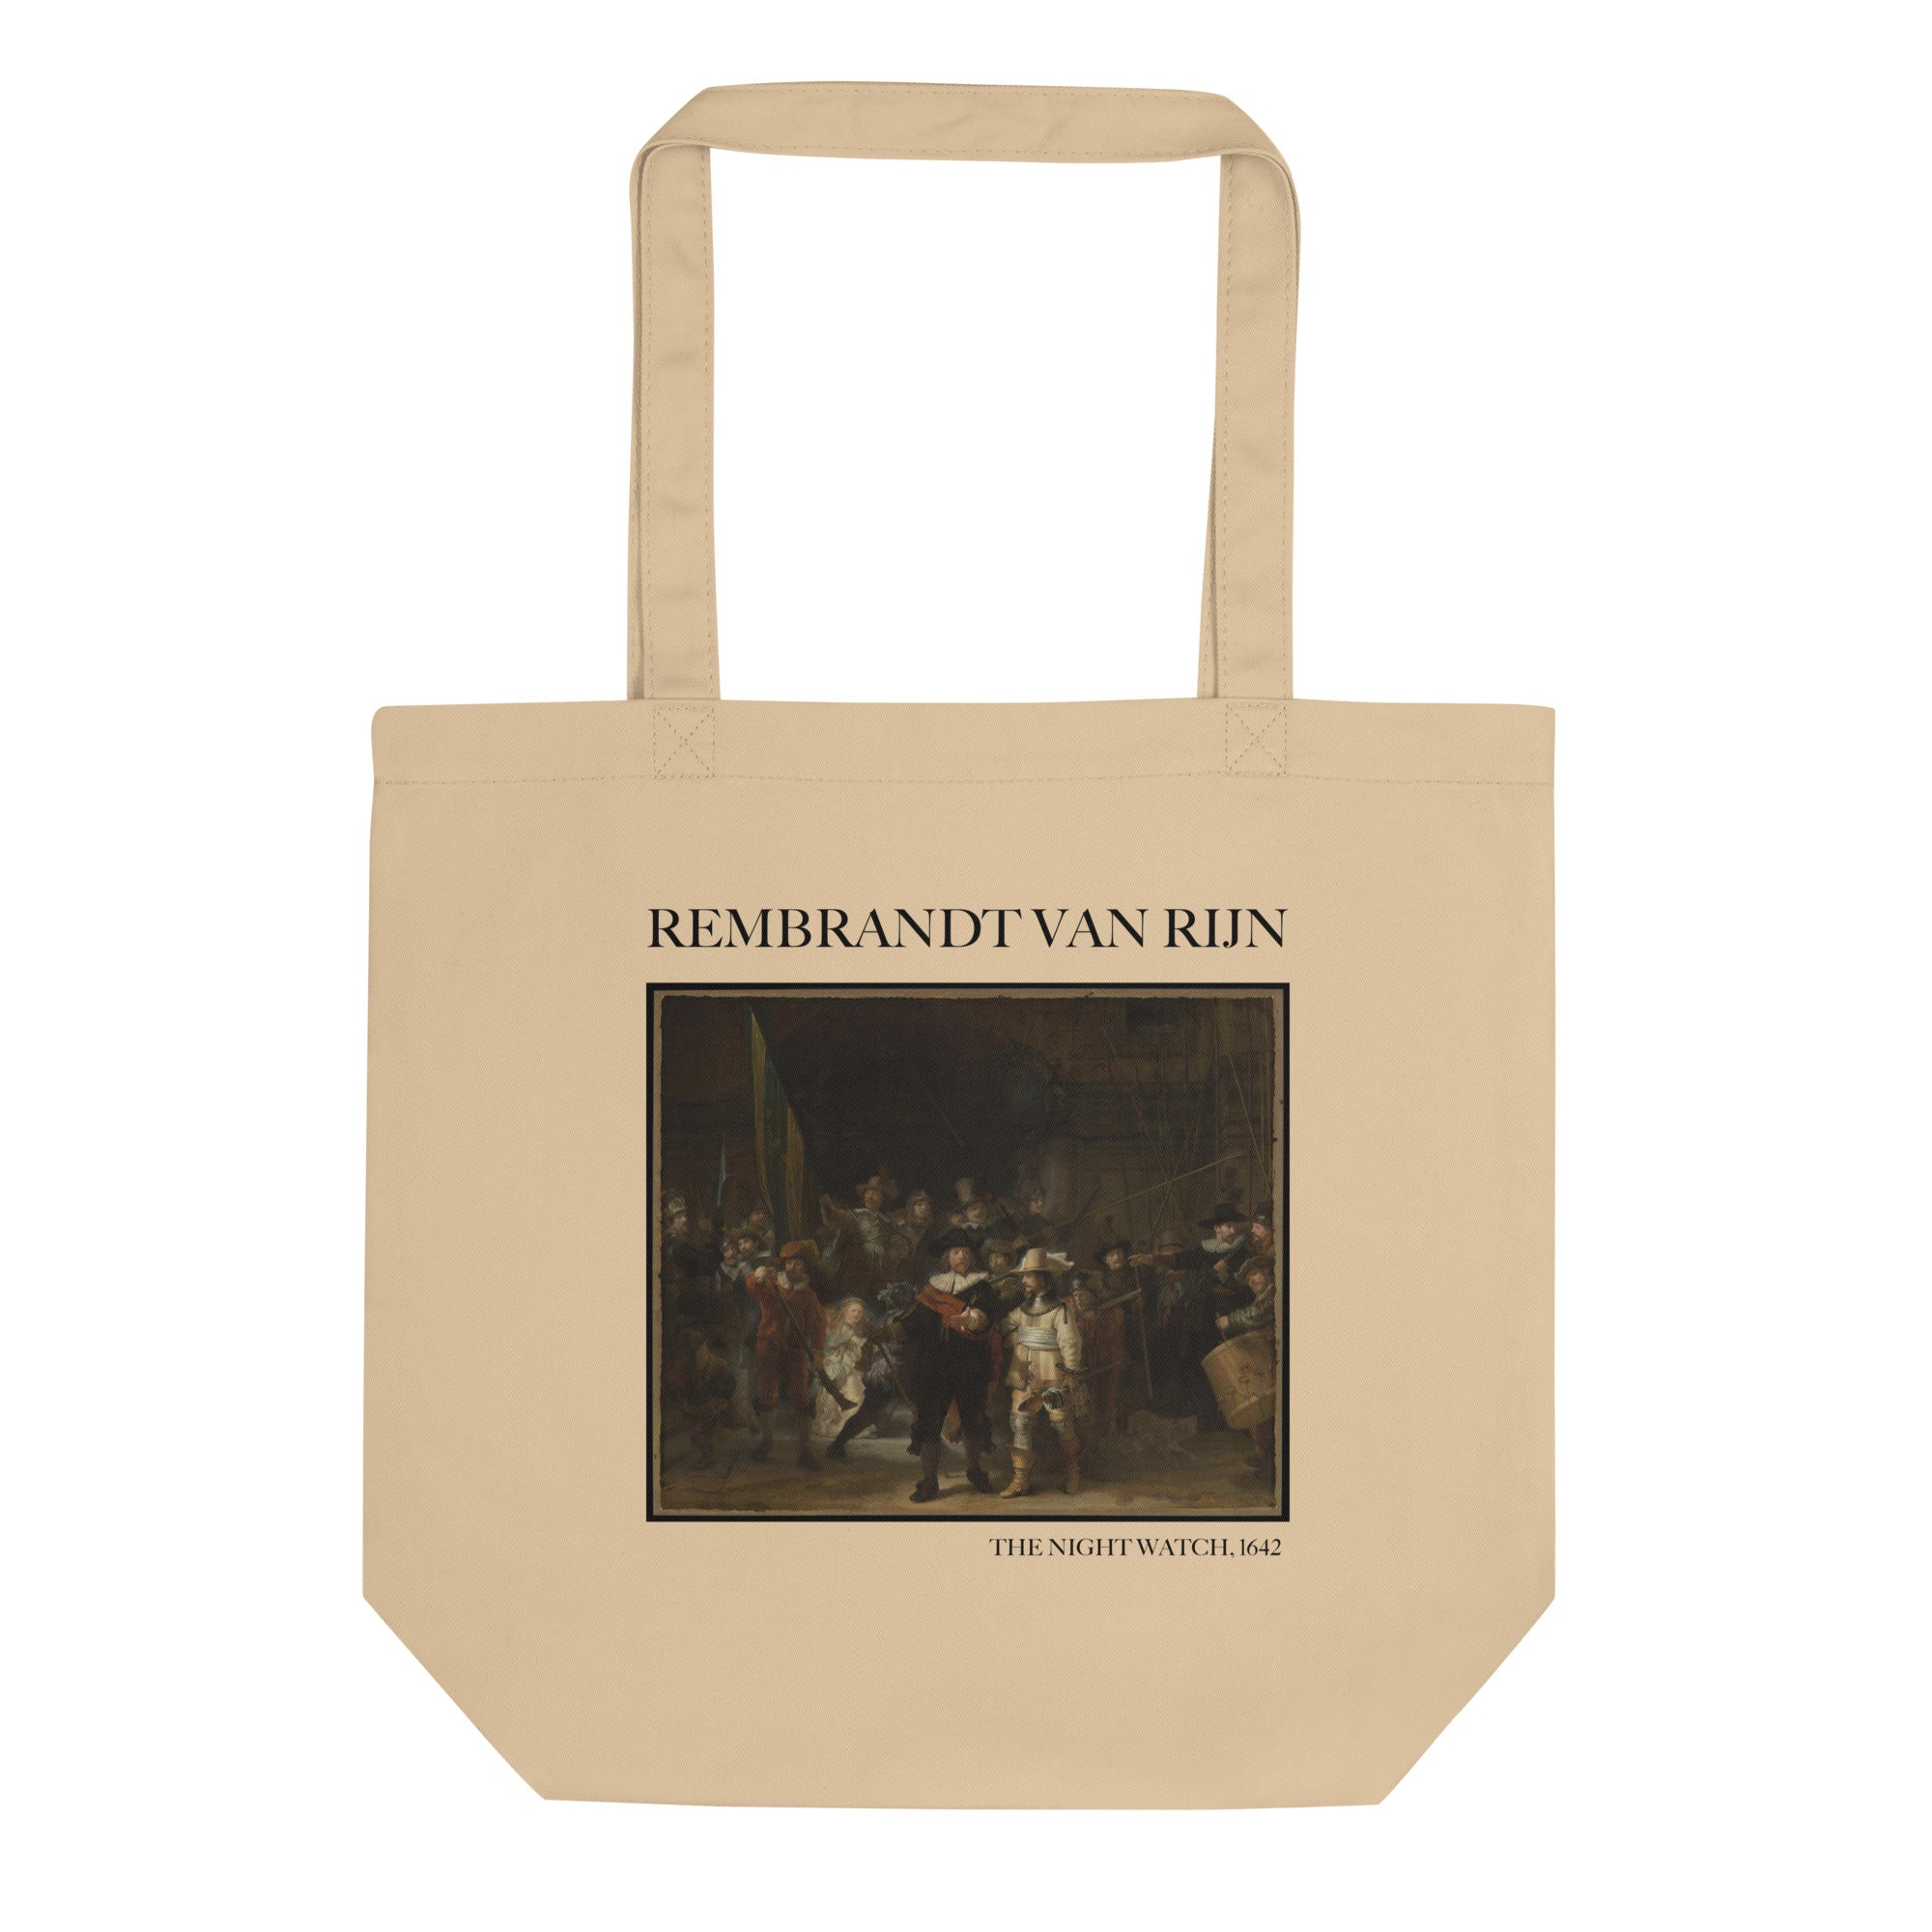 Rembrandt van Rijn 'The Night Watch' Famous Painting Totebag | Eco Friendly Art Tote Bag